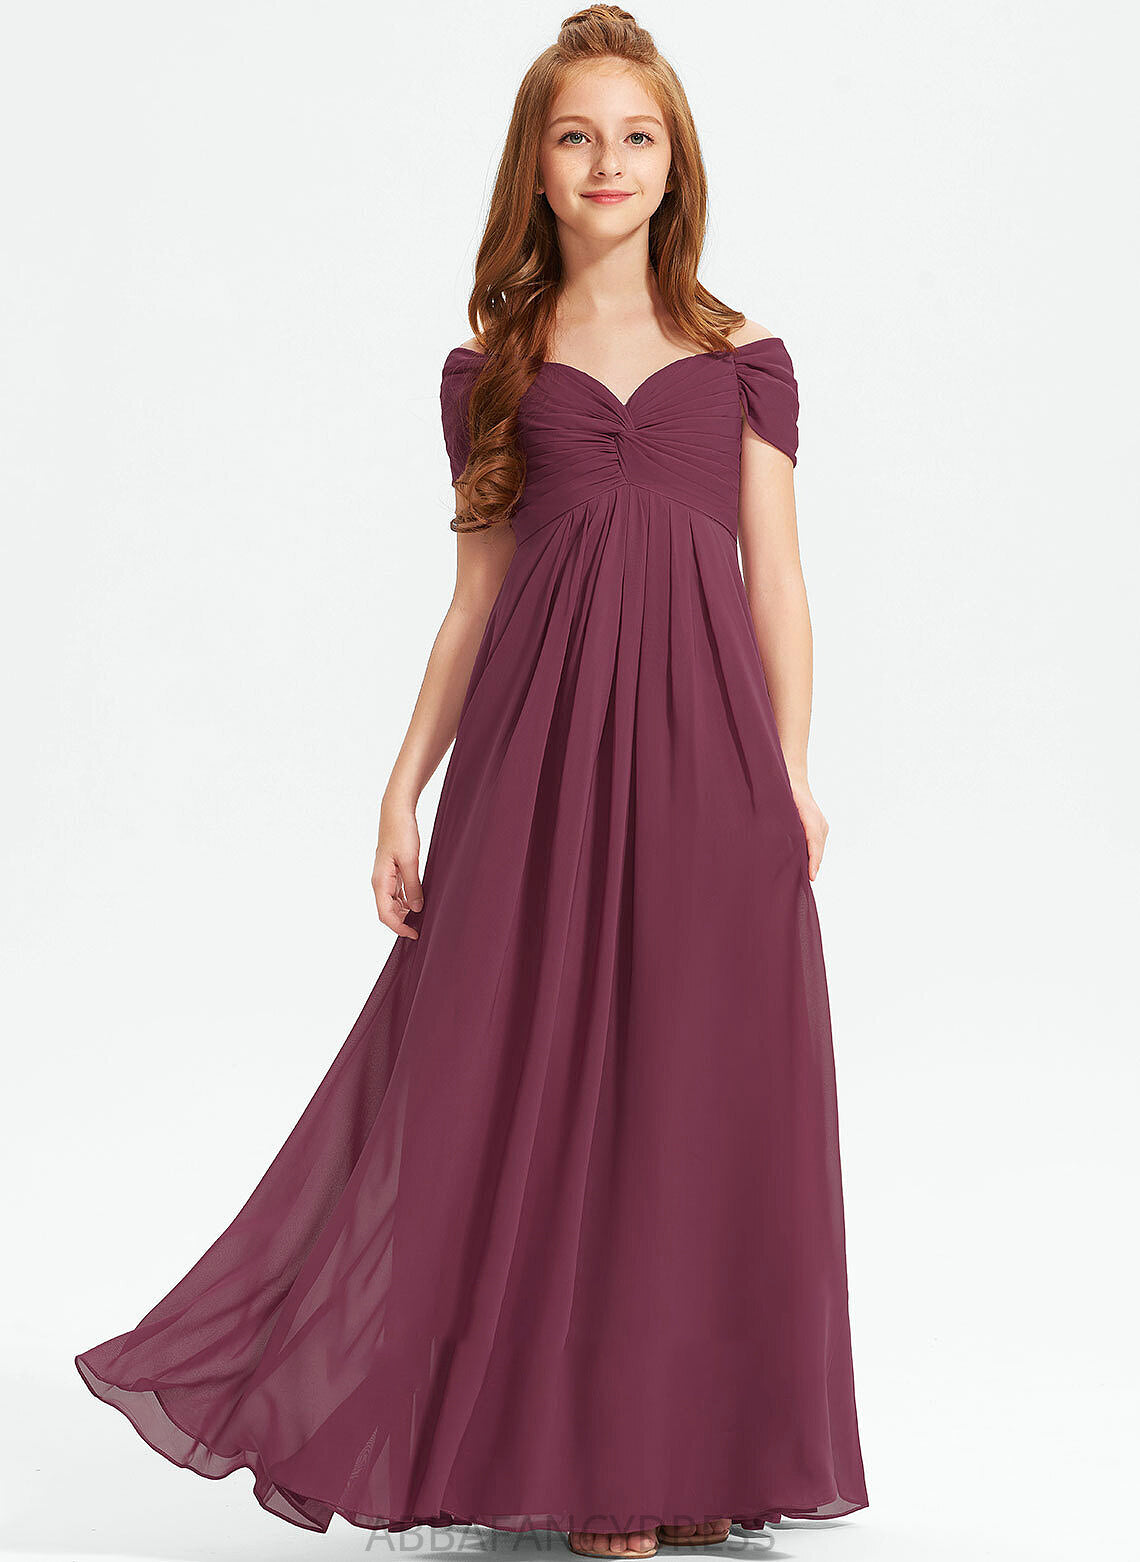 Ruffle With Chiffon Junior Bridesmaid Dresses A-Line Off-the-Shoulder Floor-Length Isabel